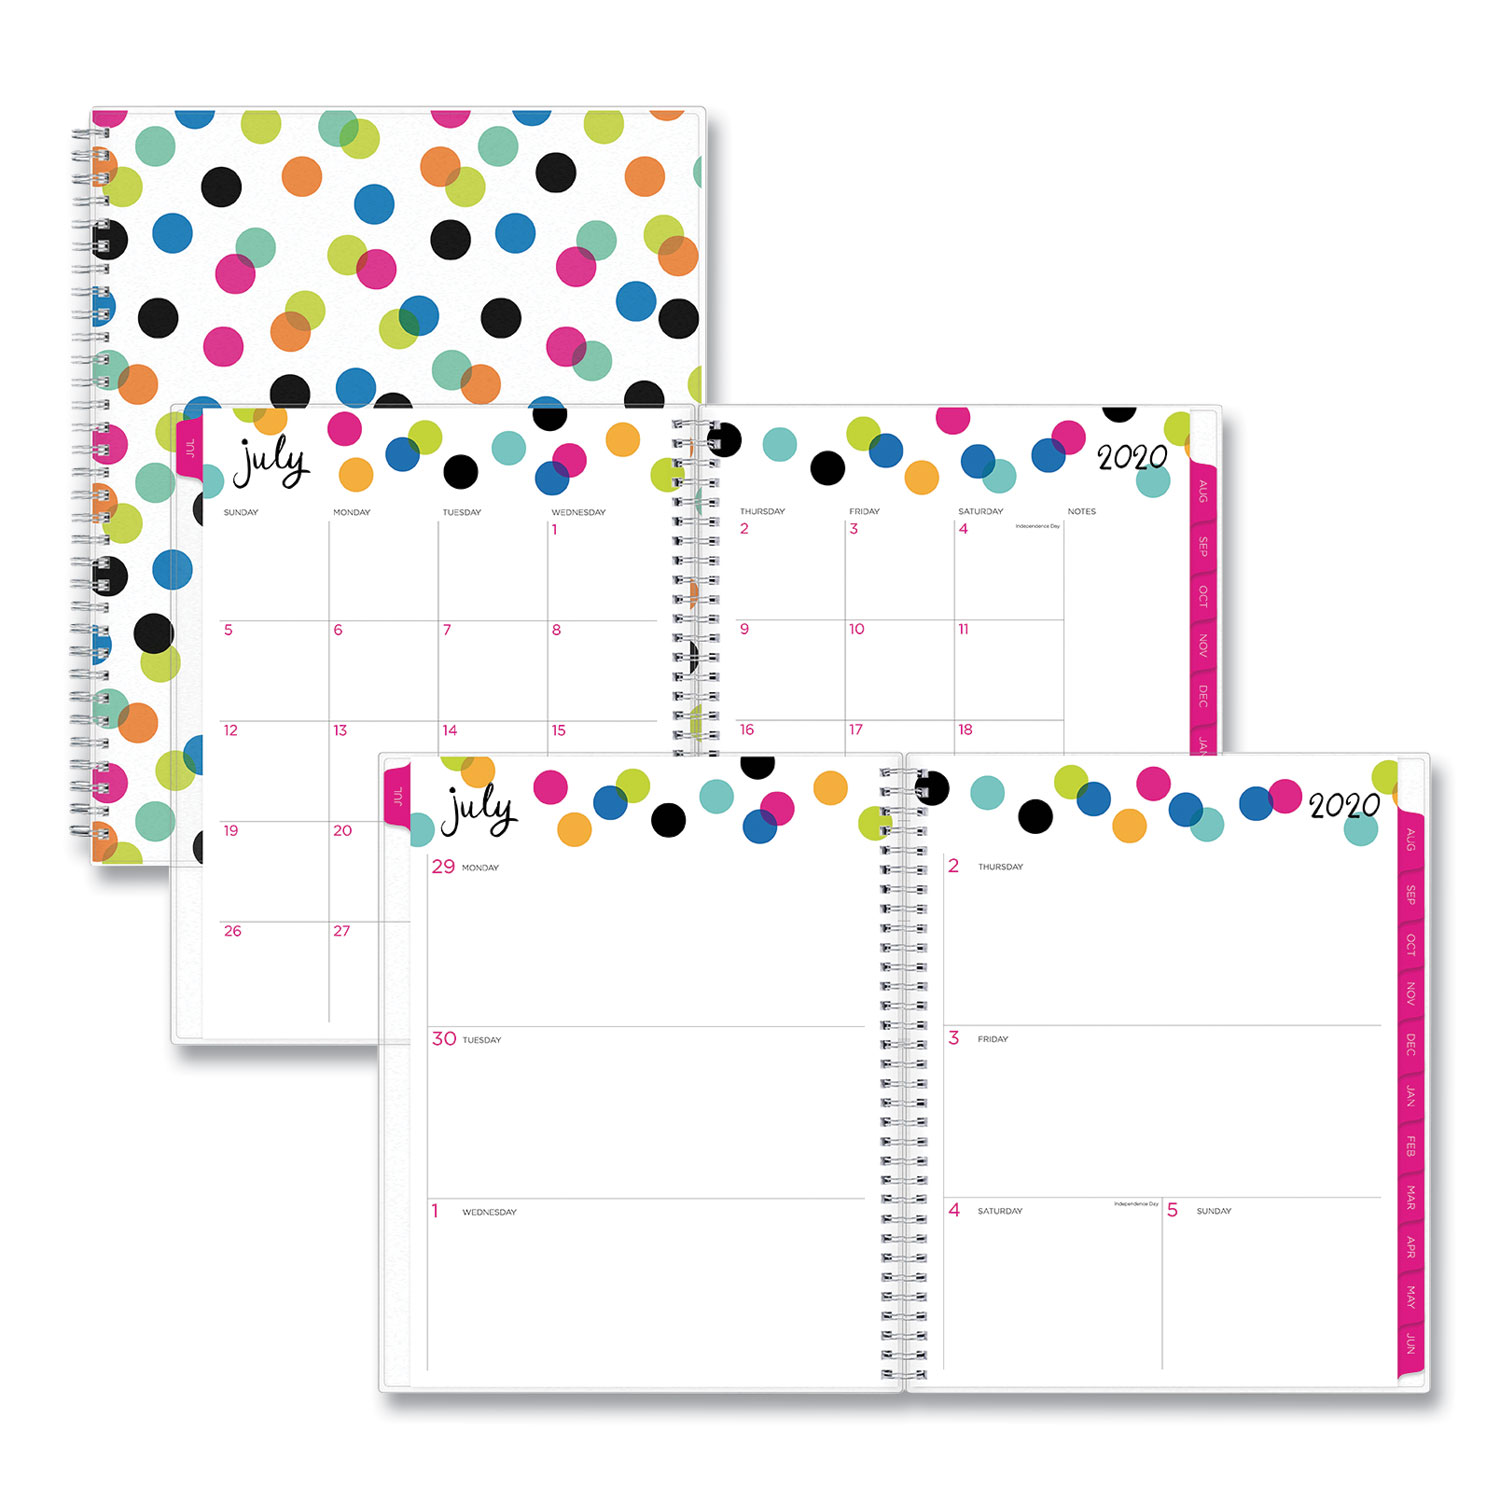  Blue Sky 100759 Ampersand Dots Academic Year Weekly/Monthly Planner, 11 x 8.5, Multicolor, 2020-2021 (BLS100759) 